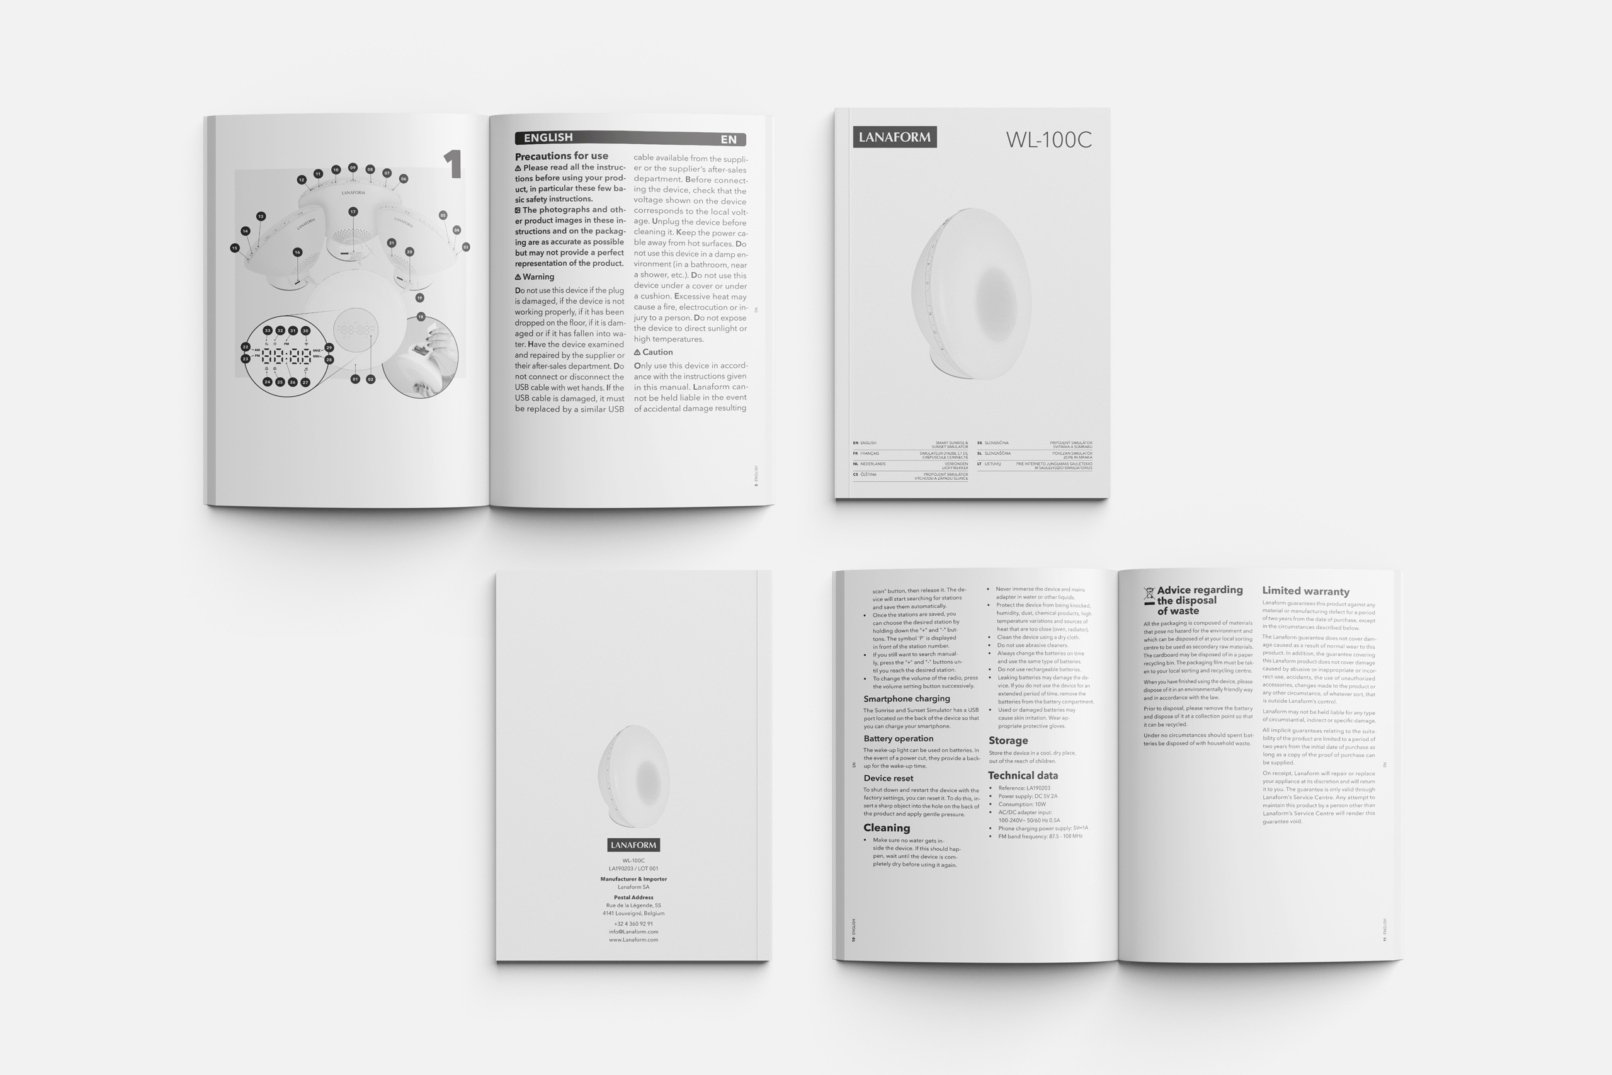 Mock-up of a few pages from the instruction manual of the WL-100C